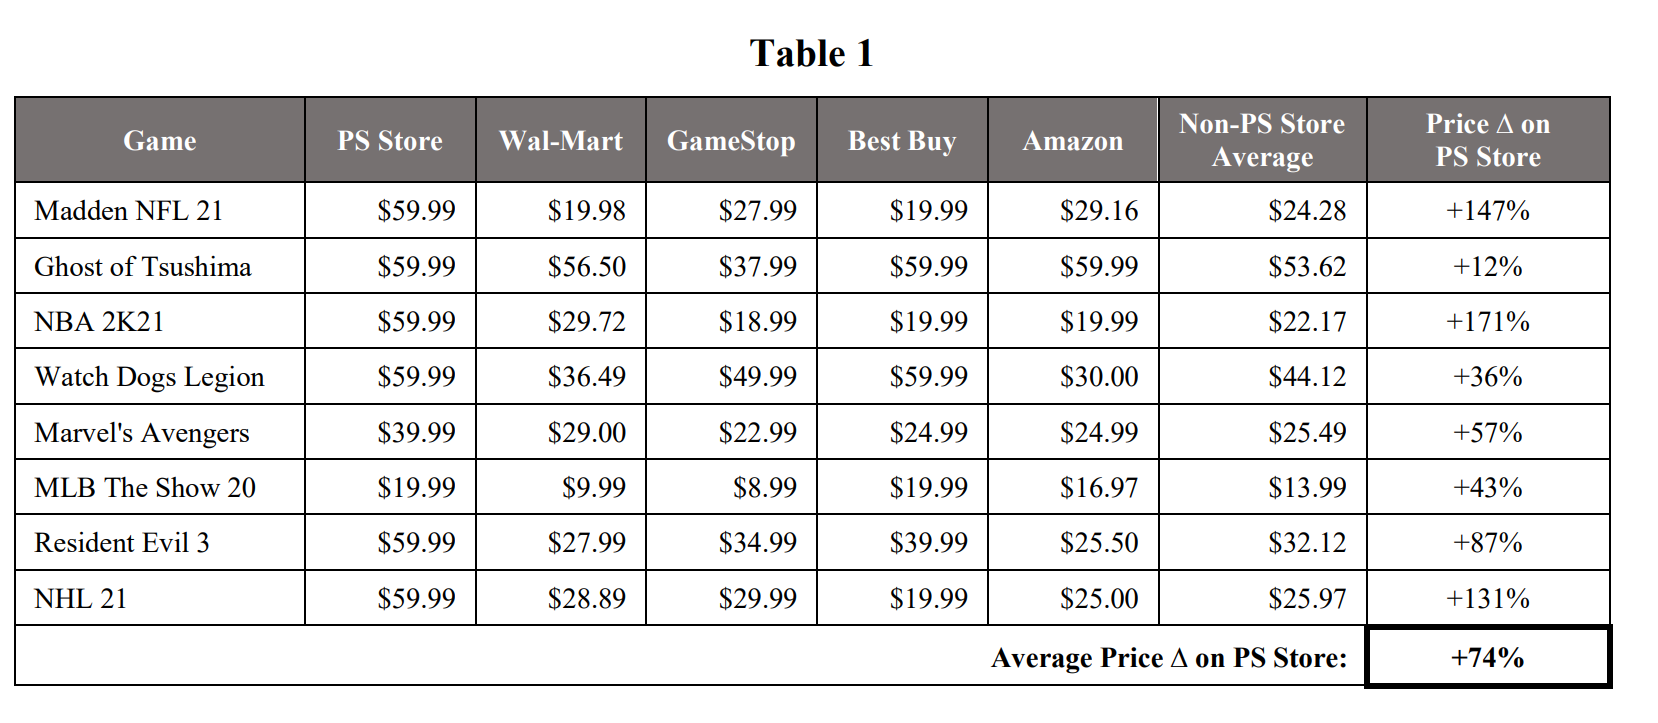 The lawsuit uses this comparison of prices for digital and disc-based PS5 games to try to prove the anticompetitive effects of Sony's alleged monopoly.